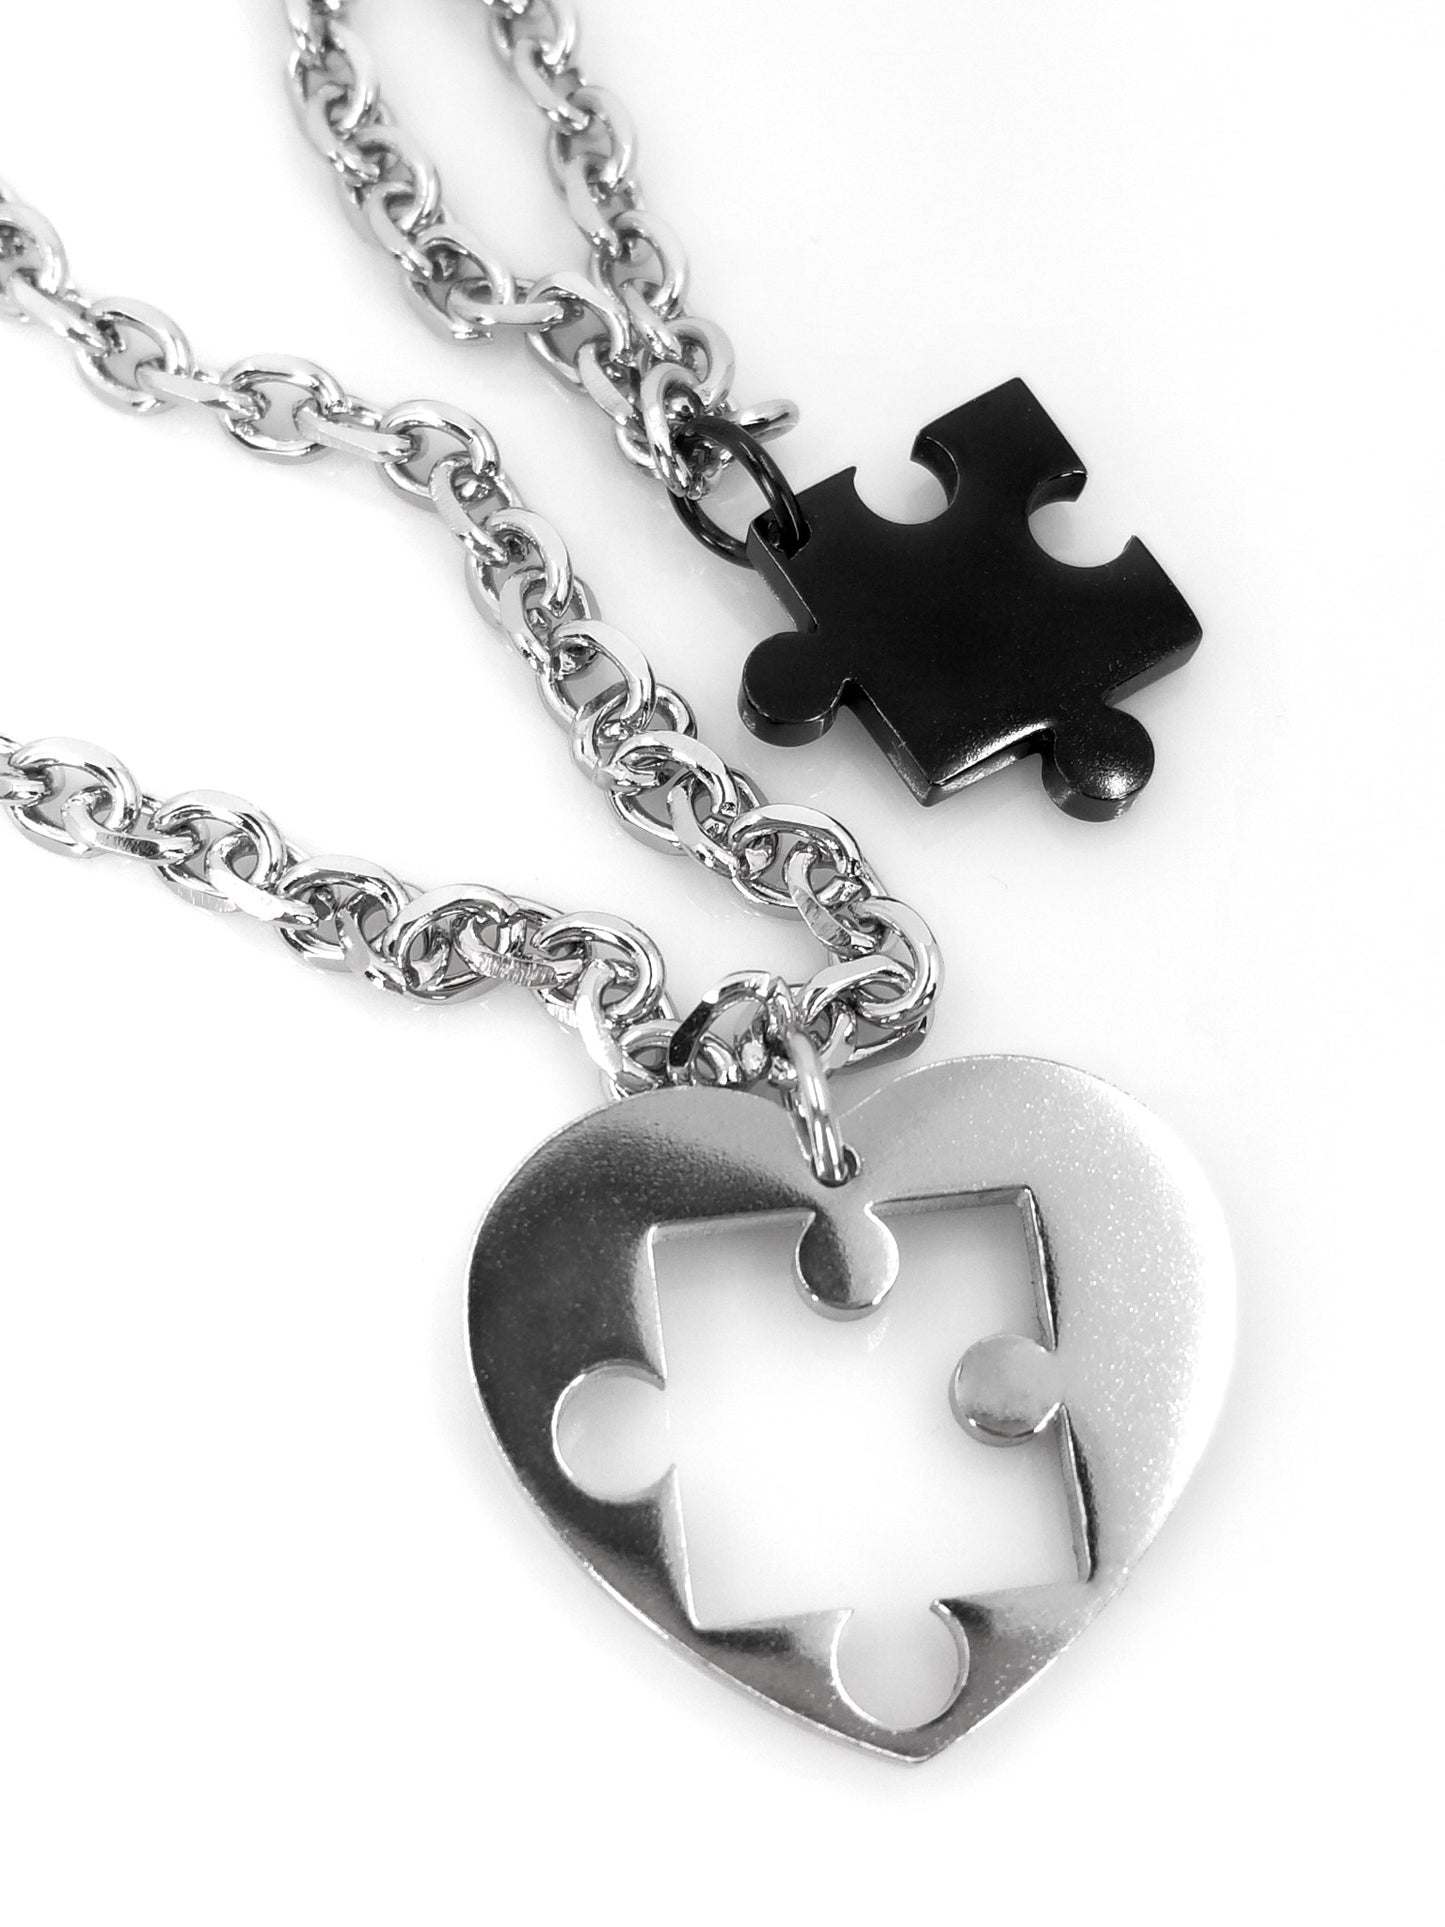 2 Piece Heart and Puzzle Necklace Set